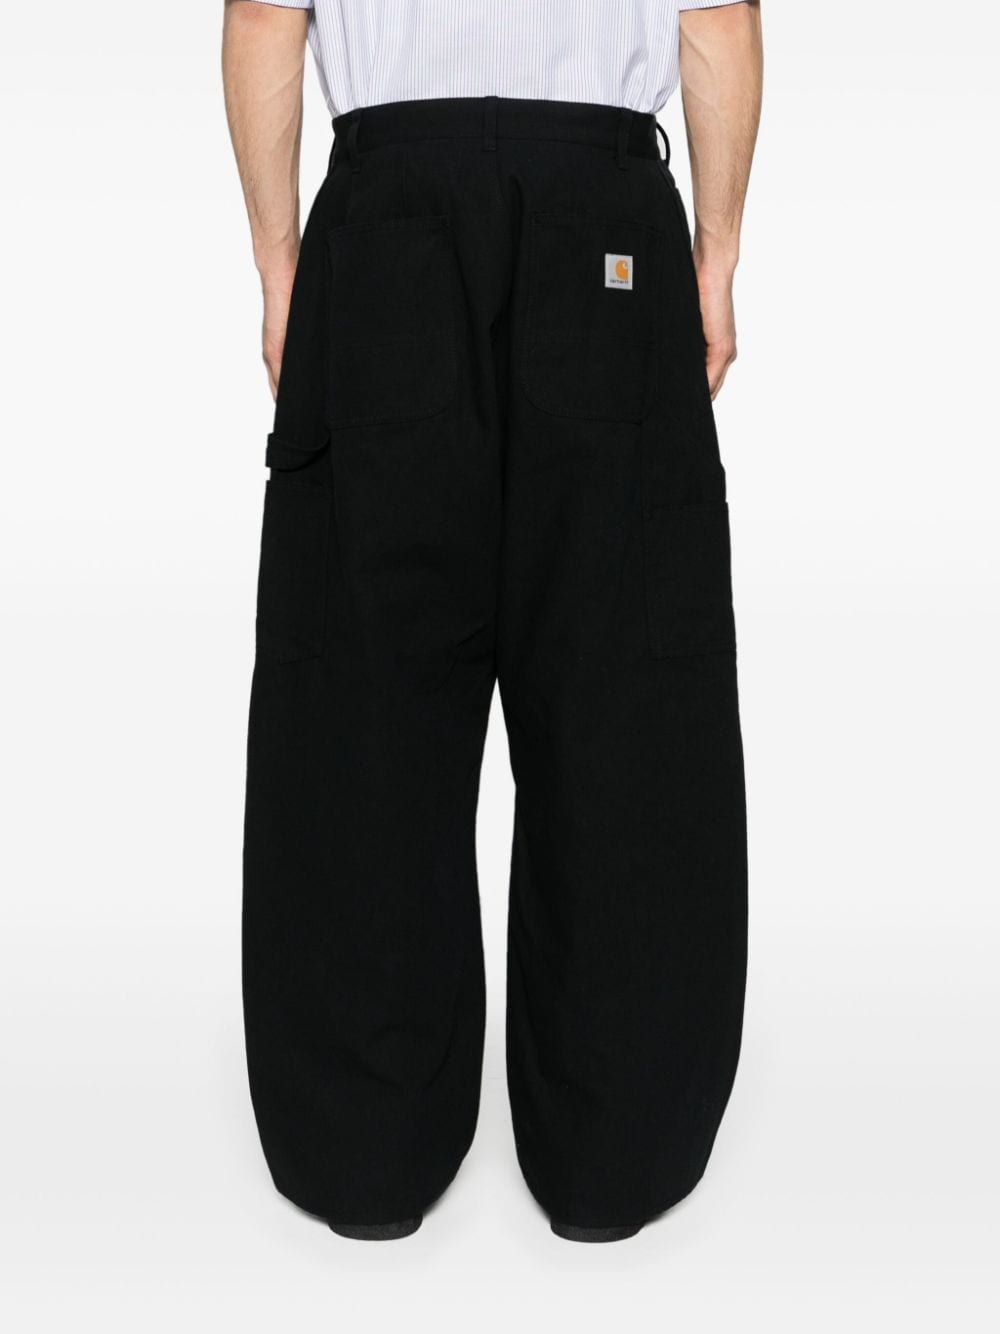 x Carhartt WIP canvas trousers<BR/><BR/><BR/>